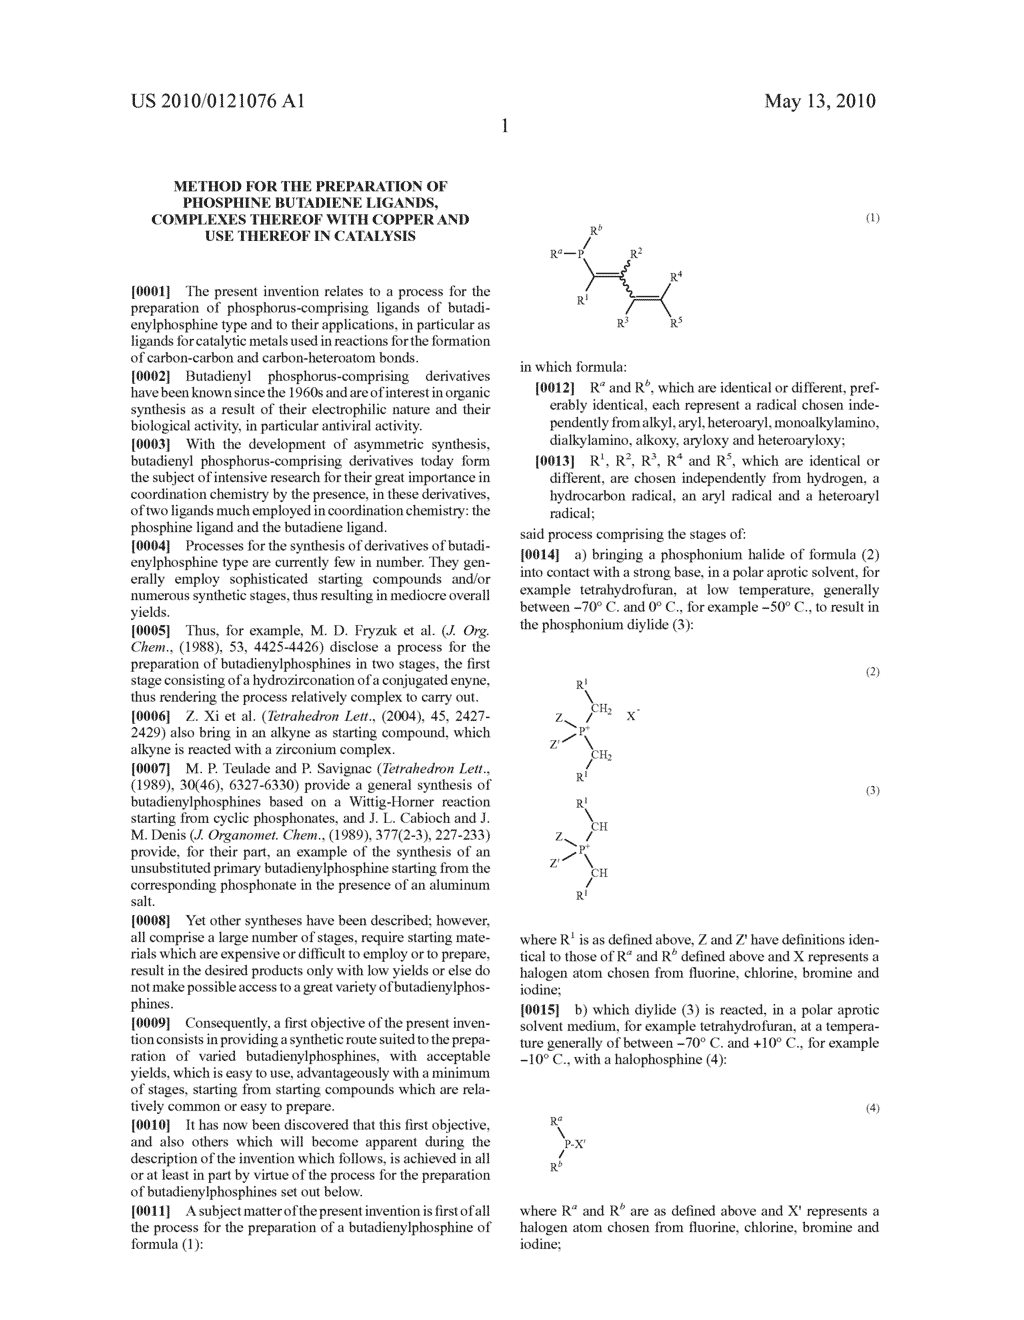 METHOD FOR THE PREPARATION OF PHOSPHINE BUTADIENE LIGANDS, COMPLEXES THEREOF WITH COPPER AND USE THEREOF IN CATALYSIS - diagram, schematic, and image 02